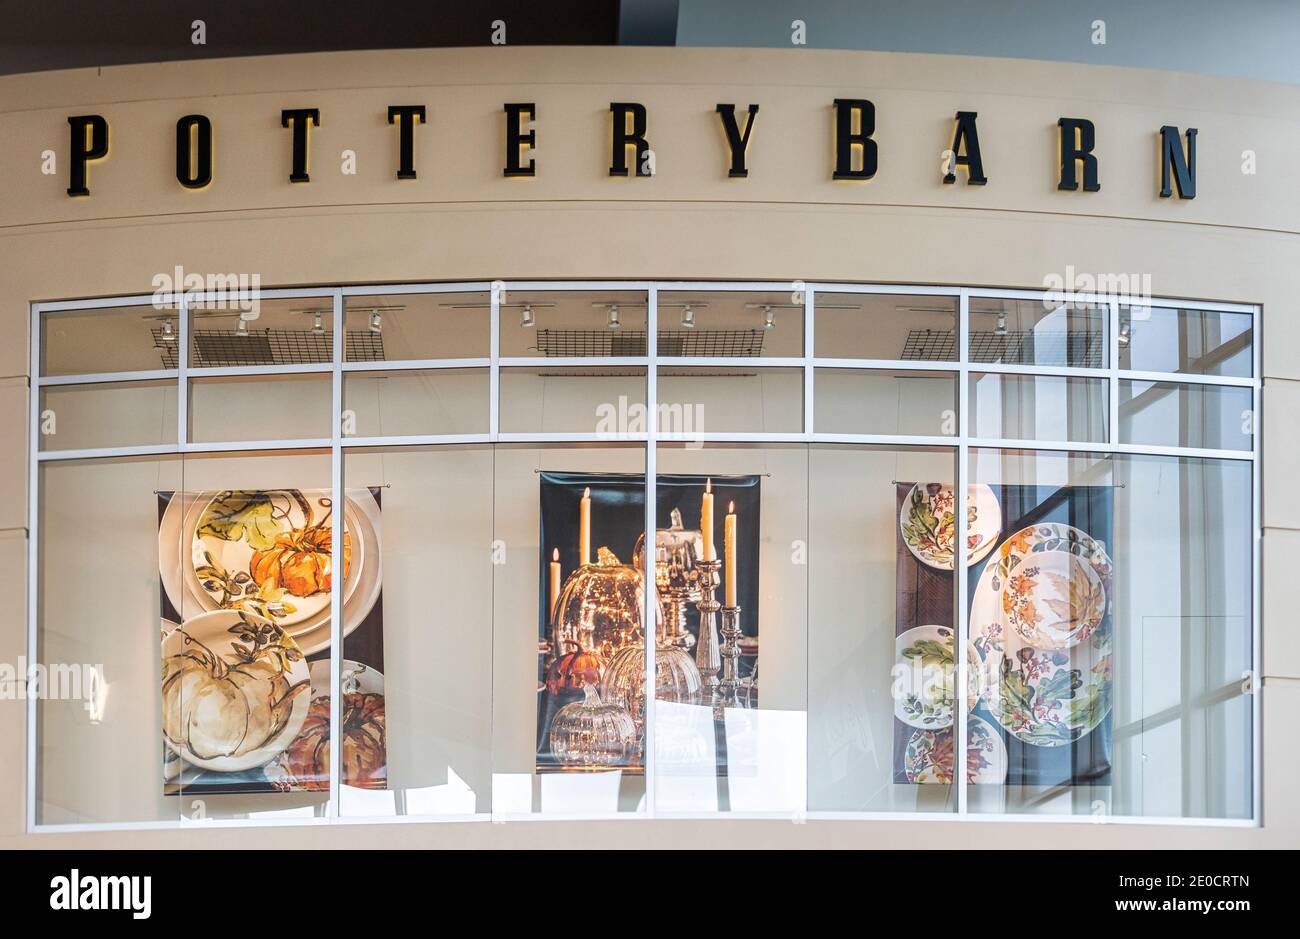 Pottery Barn Sign In Store